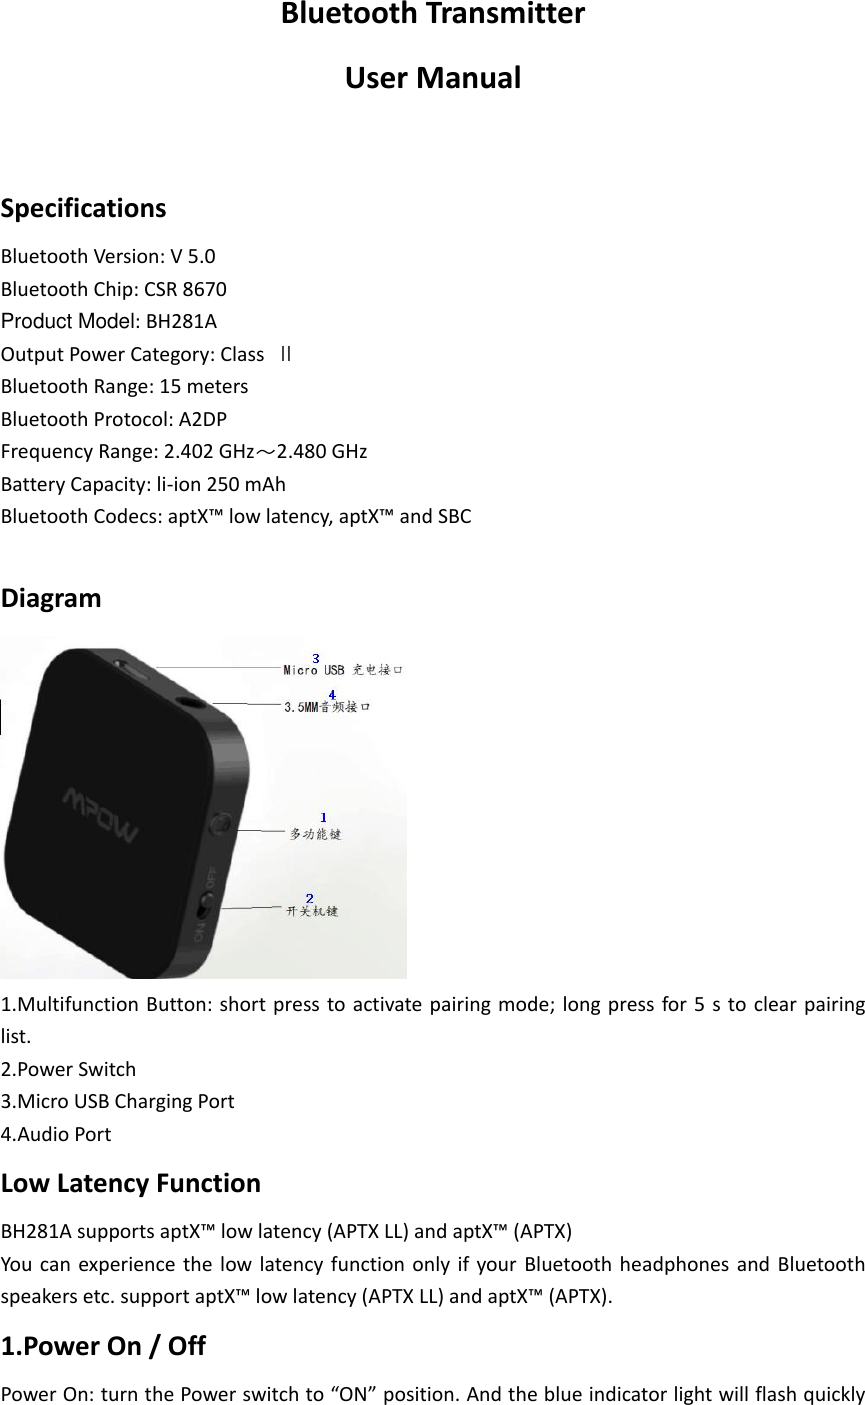 Bluetooth Transmitter User Manual  Specifications Bluetooth Version: V 5.0 Bluetooth Chip: CSR 8670 Product Model: BH281A Output Power Category: Class  Ⅱ Bluetooth Range: 15 meters Bluetooth Protocol: A2DP Frequency Range: 2.402 GHz～2.480 GHz Battery Capacity: li-ion 250 mAh Bluetooth Codecs: aptX™ low latency, aptX™ and SBC  Diagram  1.Multifunction Button: short press to activate pairing  mode;  long press for 5 s to  clear pairing list. 2.Power Switch 3.Micro USB Charging Port 4.Audio Port Low Latency Function BH281A supports aptX™ low latency (APTX LL) and aptX™ (APTX) You  can experience the  low  latency  function  only  if  your  Bluetooth headphones  and  Bluetooth speakers etc. support aptX™ low latency (APTX LL) and aptX™ (APTX). 1.Power On / Off Power On: turn the Power switch to “ON” position. And the blue indicator light will flash quickly 